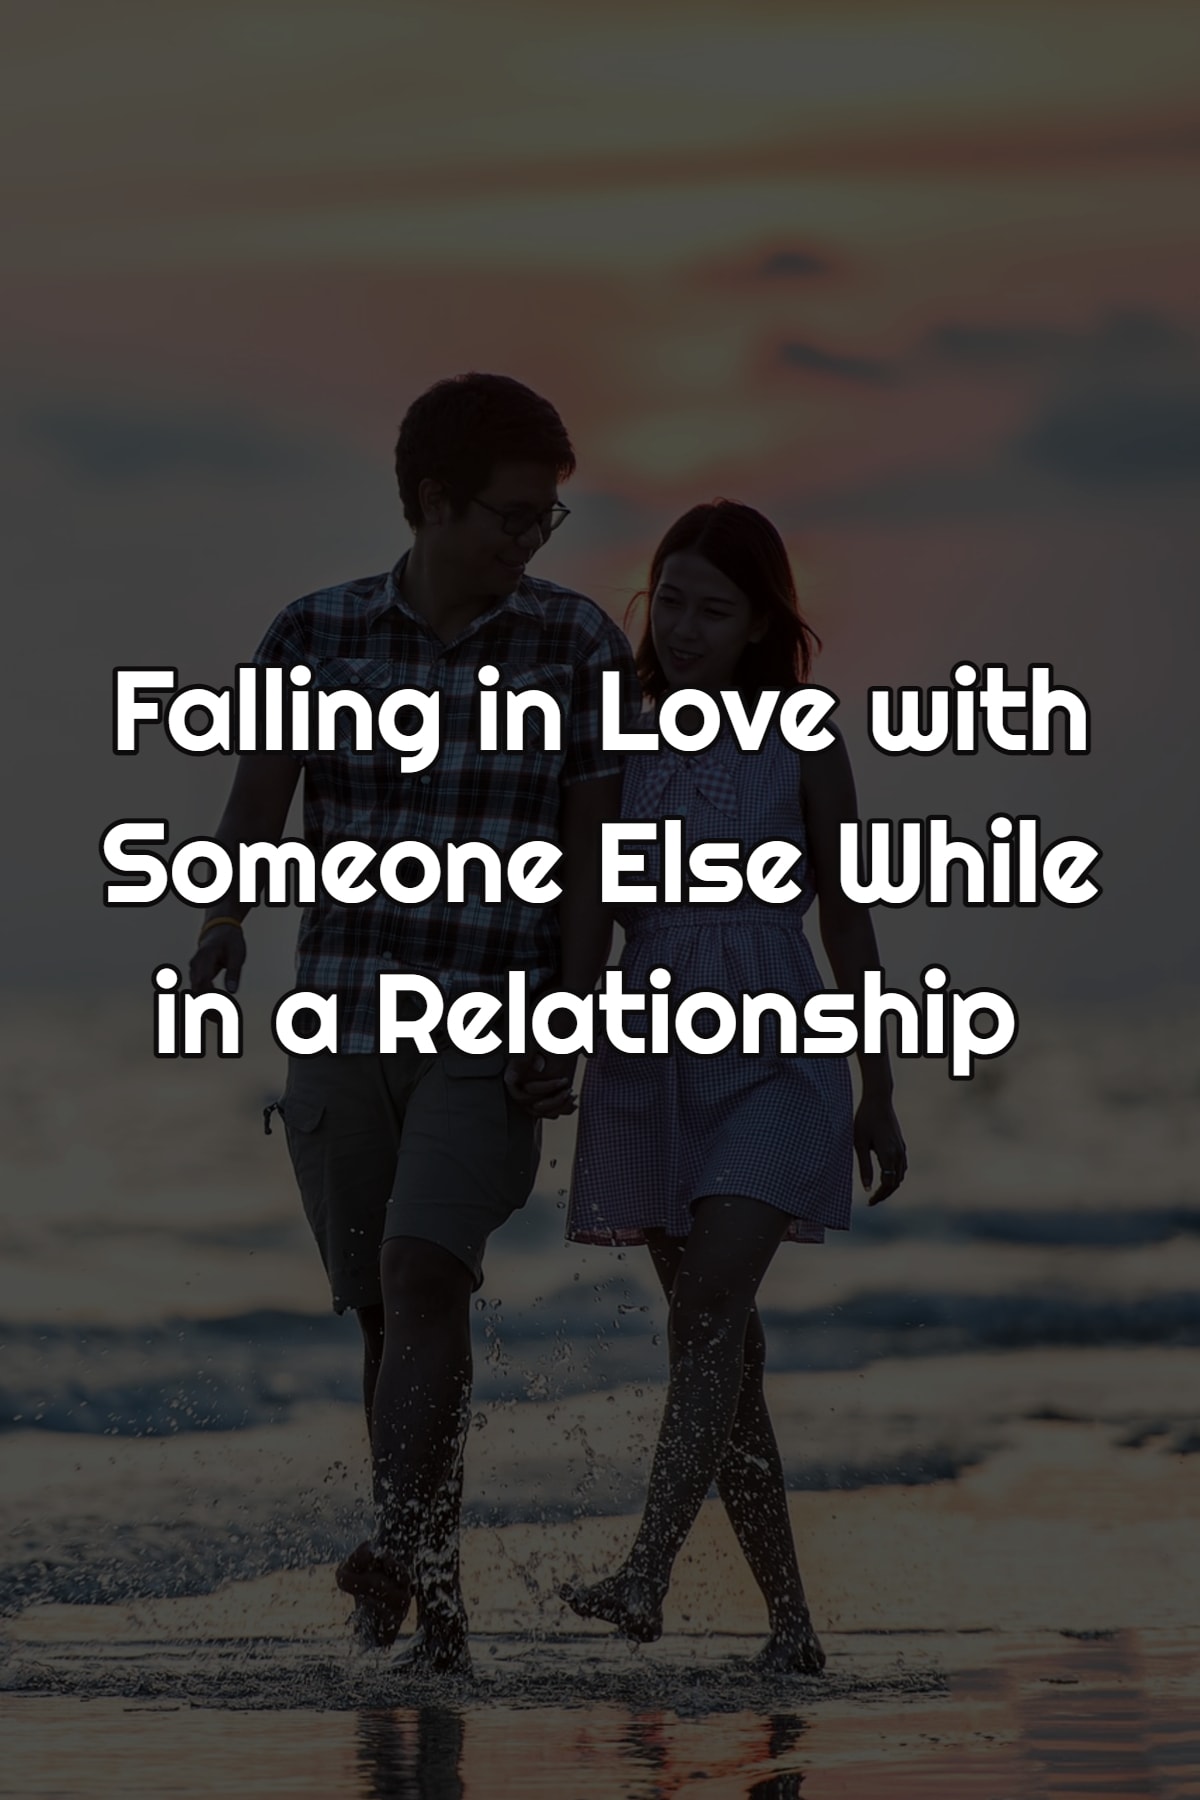 Falling in Love with Someone Else While in a Relationship Quotes